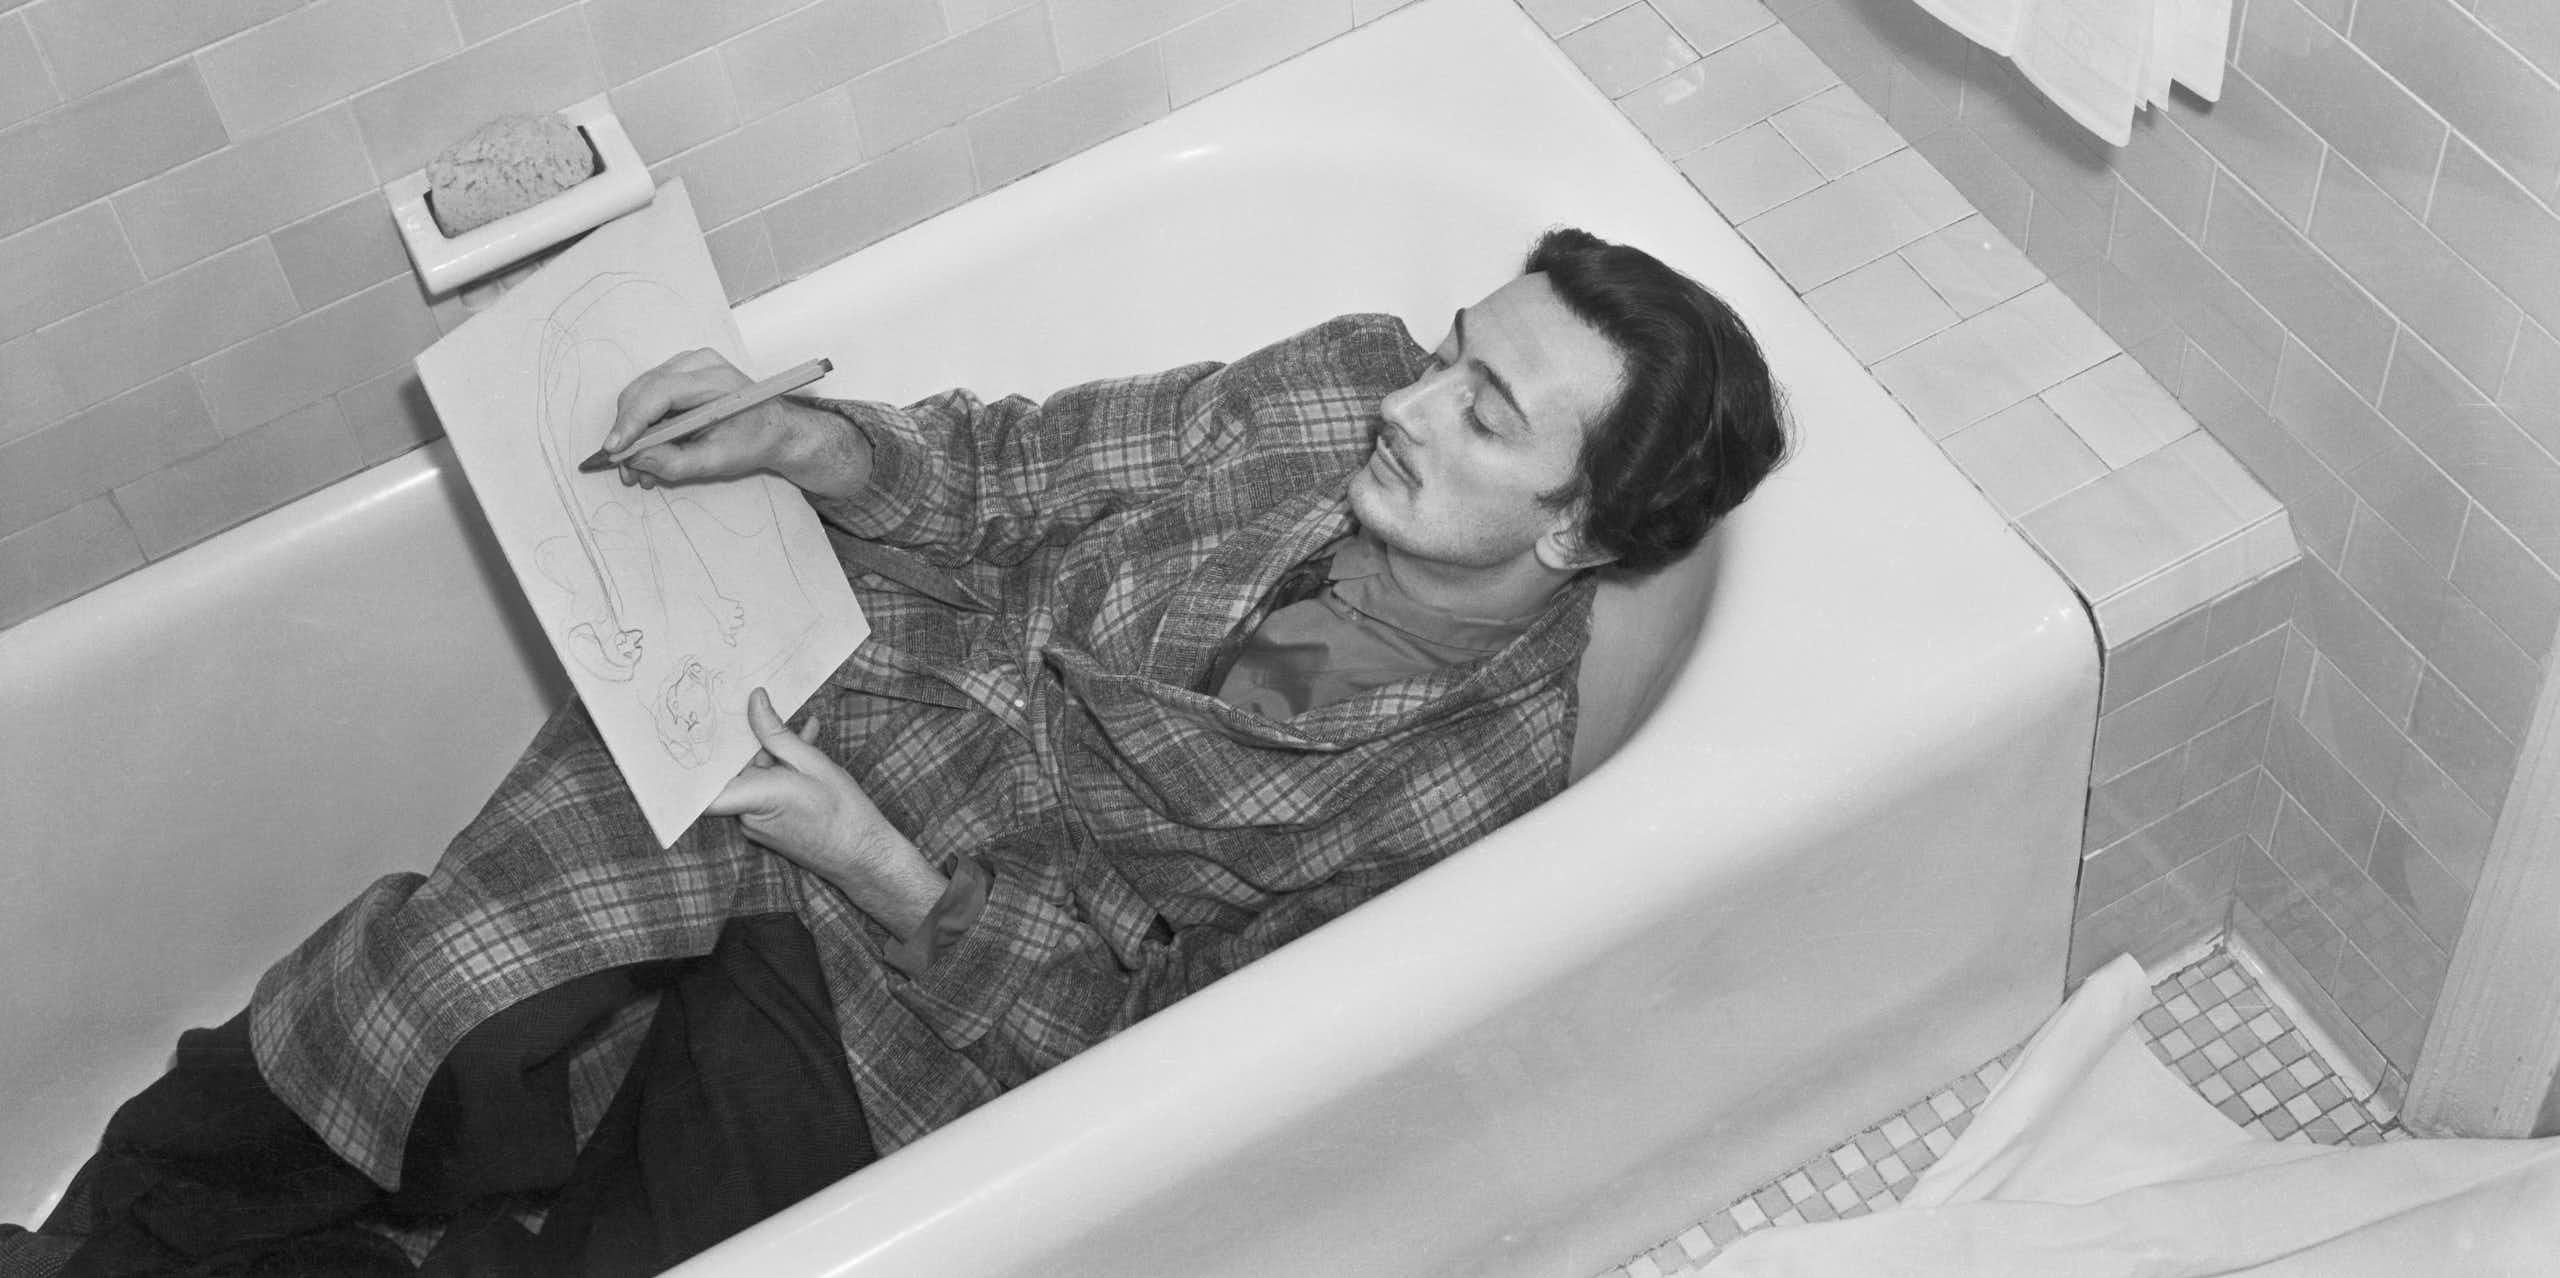 Black and white photo of young man with thin mustache lying in a bathtub, fully clothed, while sketching on a piece of paper.